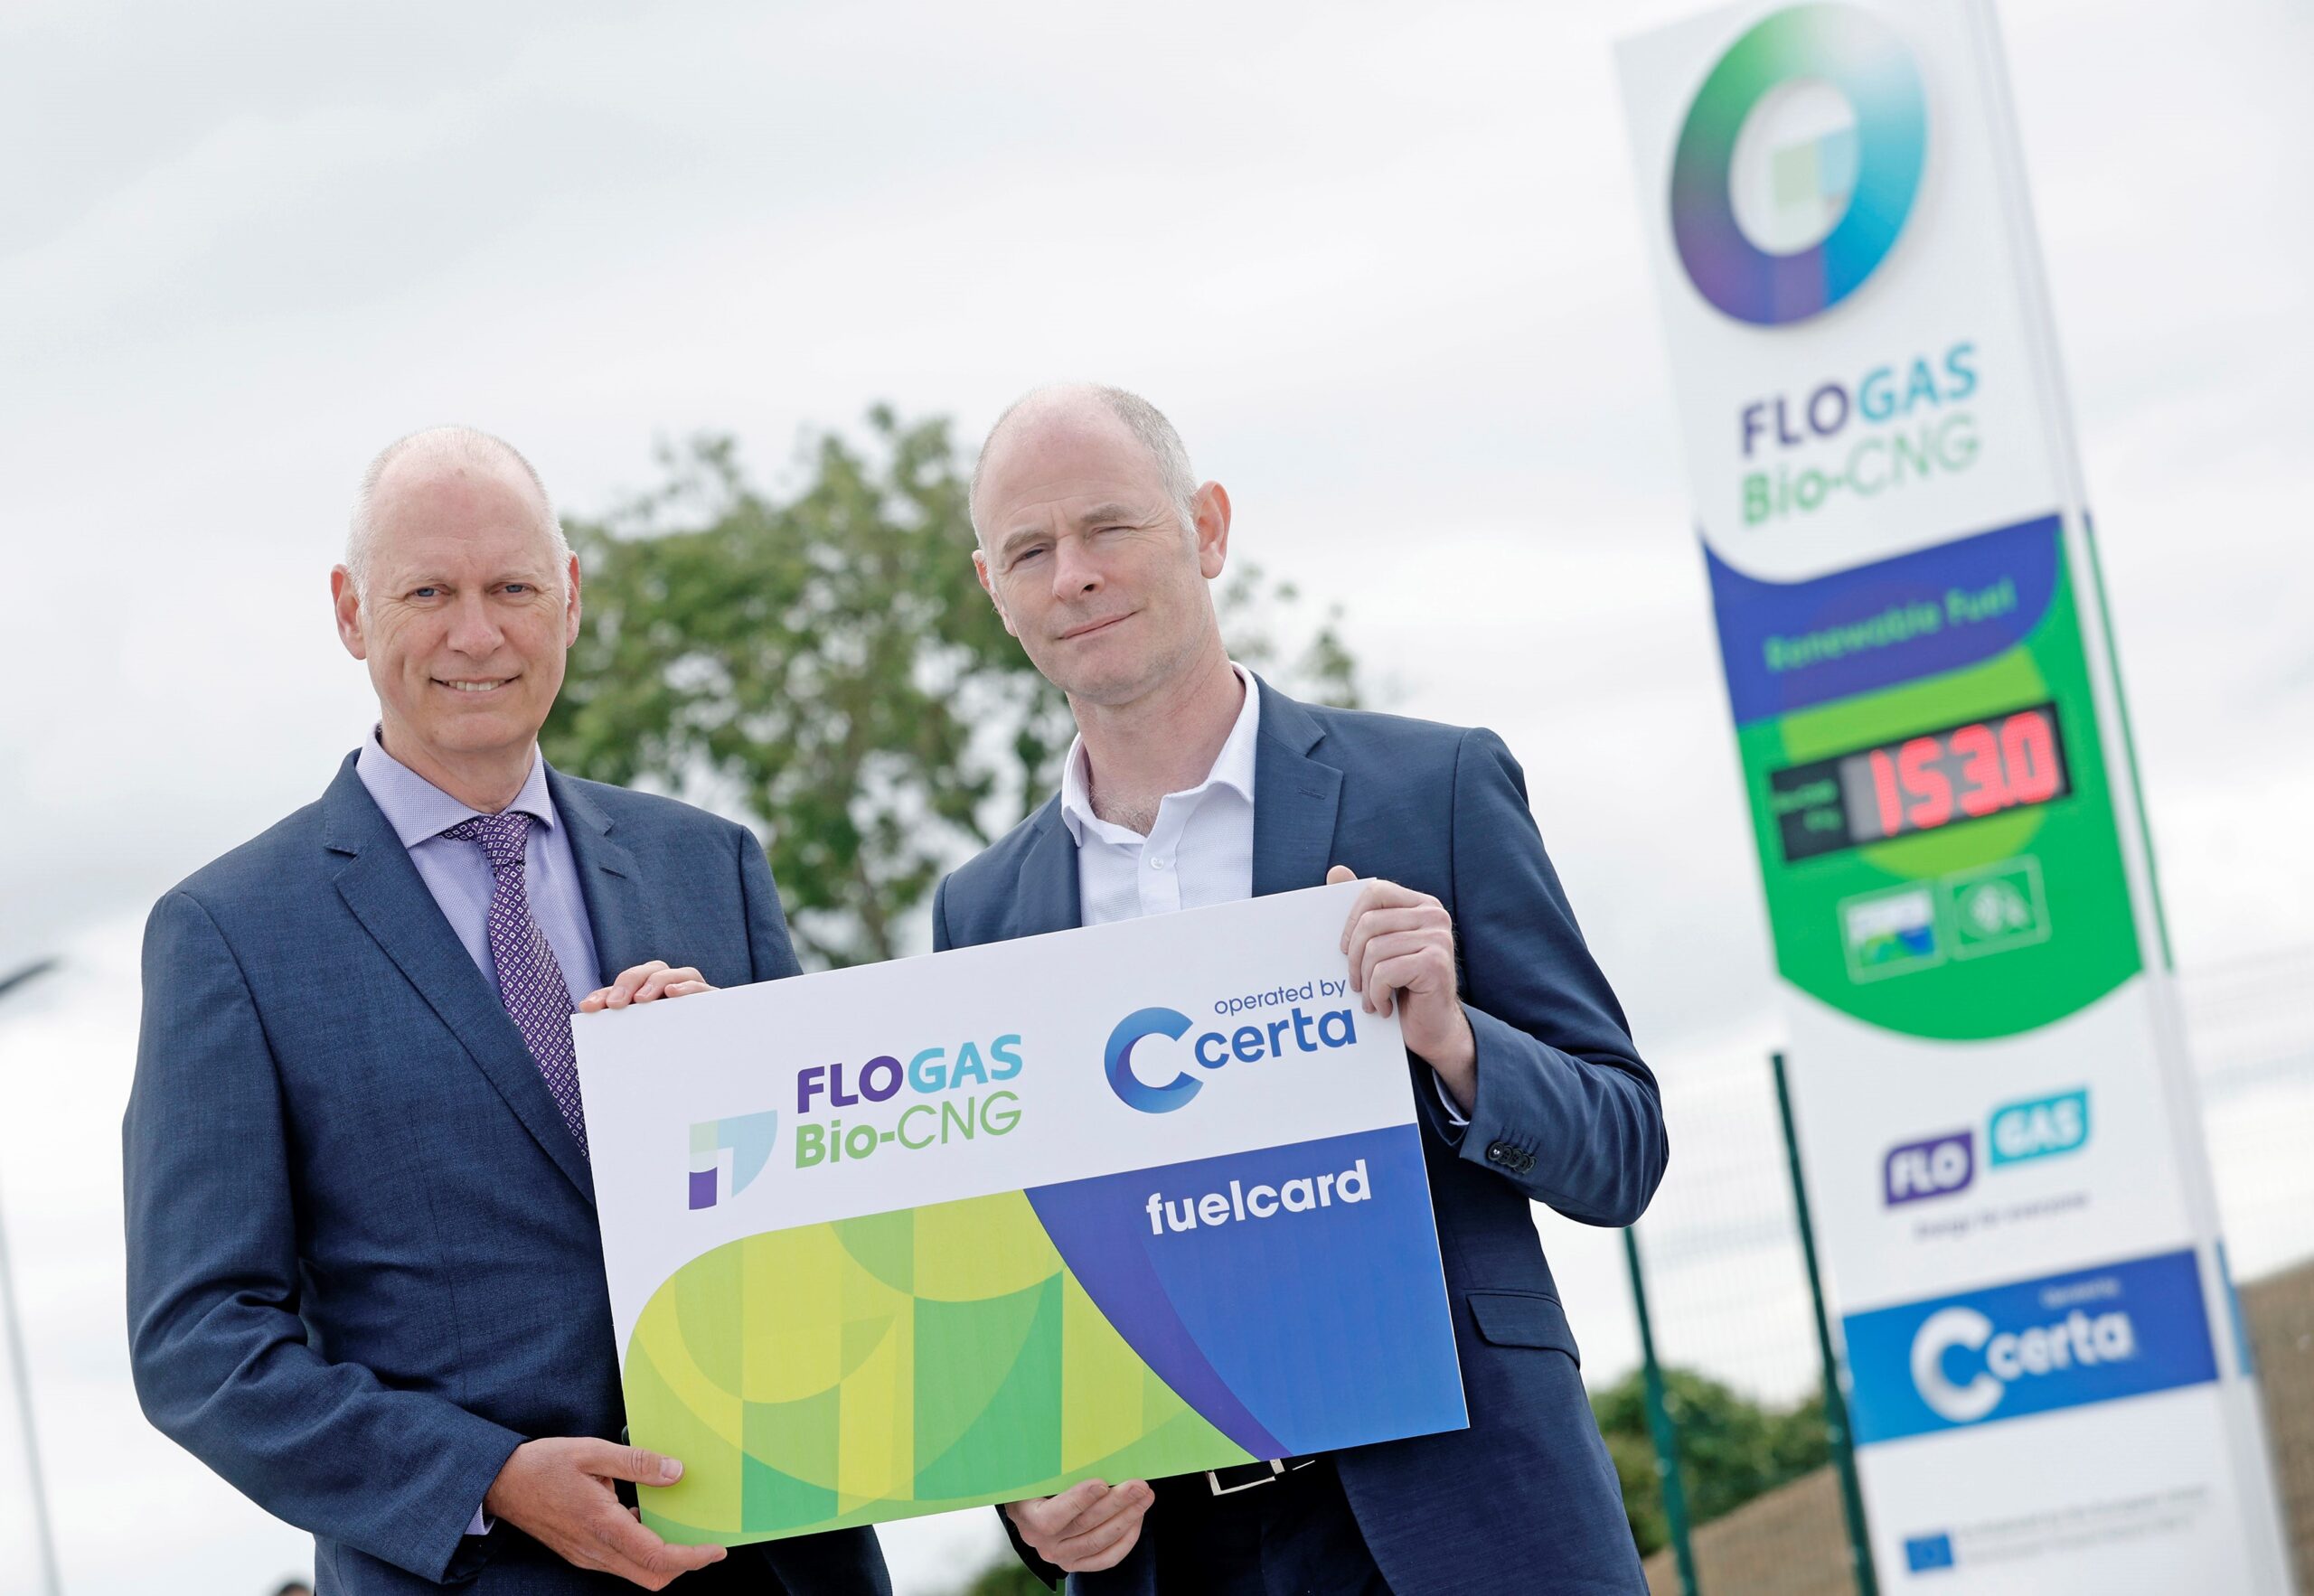 Minister of State at the Department of Environment, Climate and Communications Ossian Smyth TD and Managing Director of Flogas, John Rooney at the official opening of Bio-CNG Station